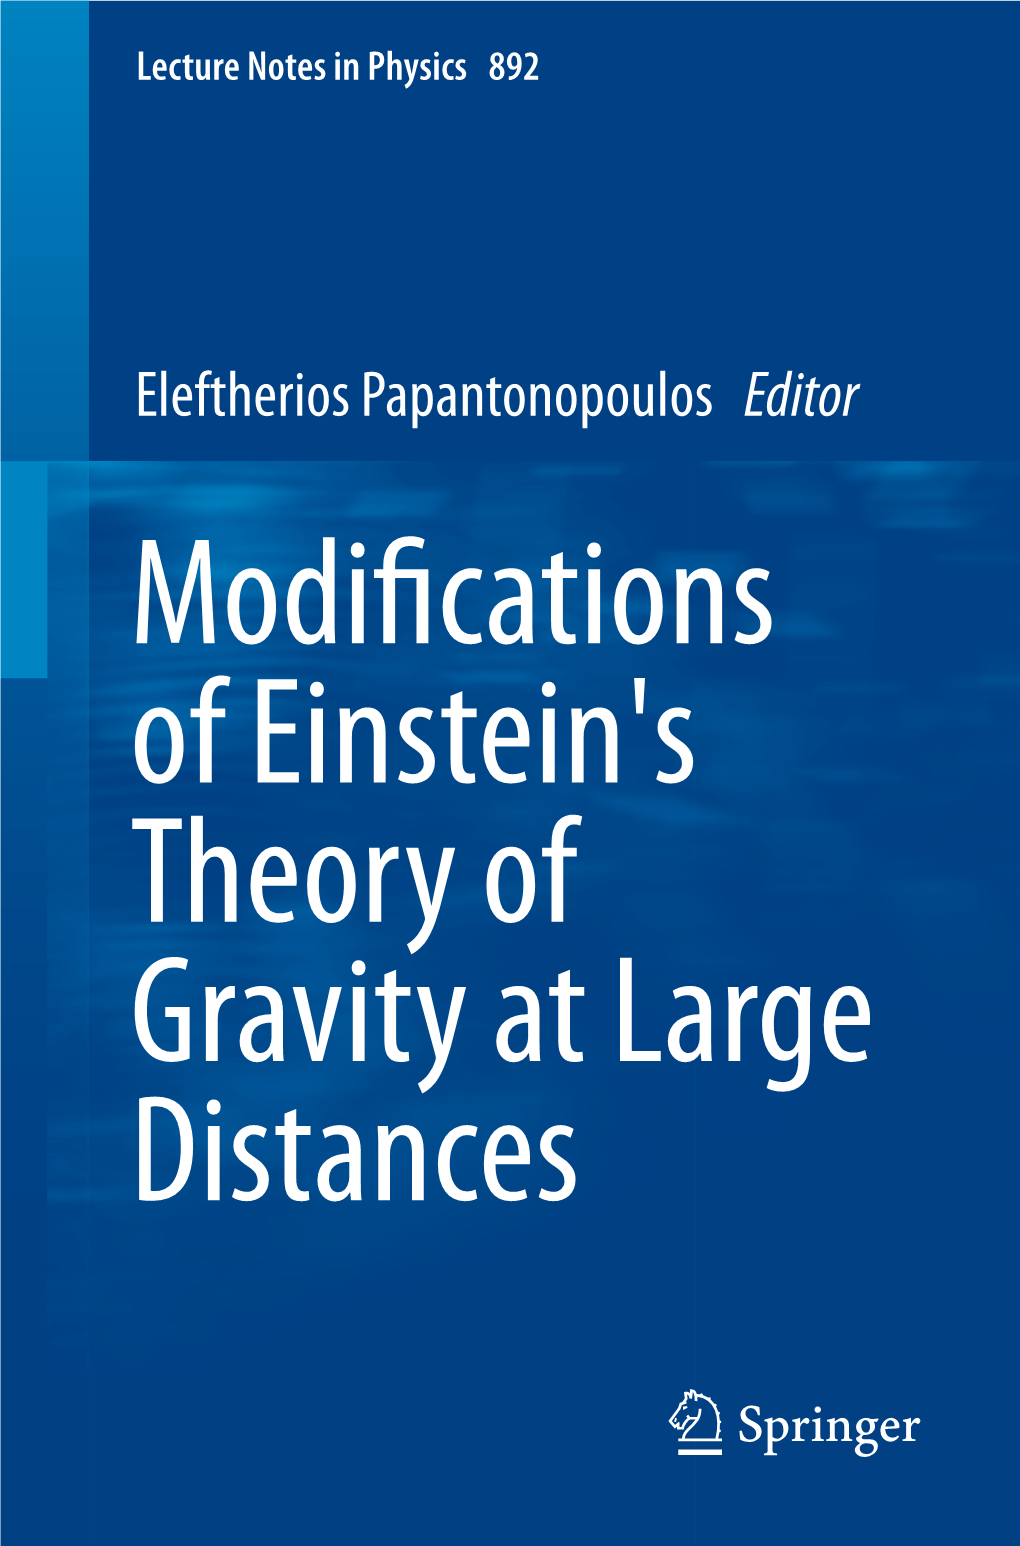 Modi Cations of Einstein's Theory of Gravity at Large Distances